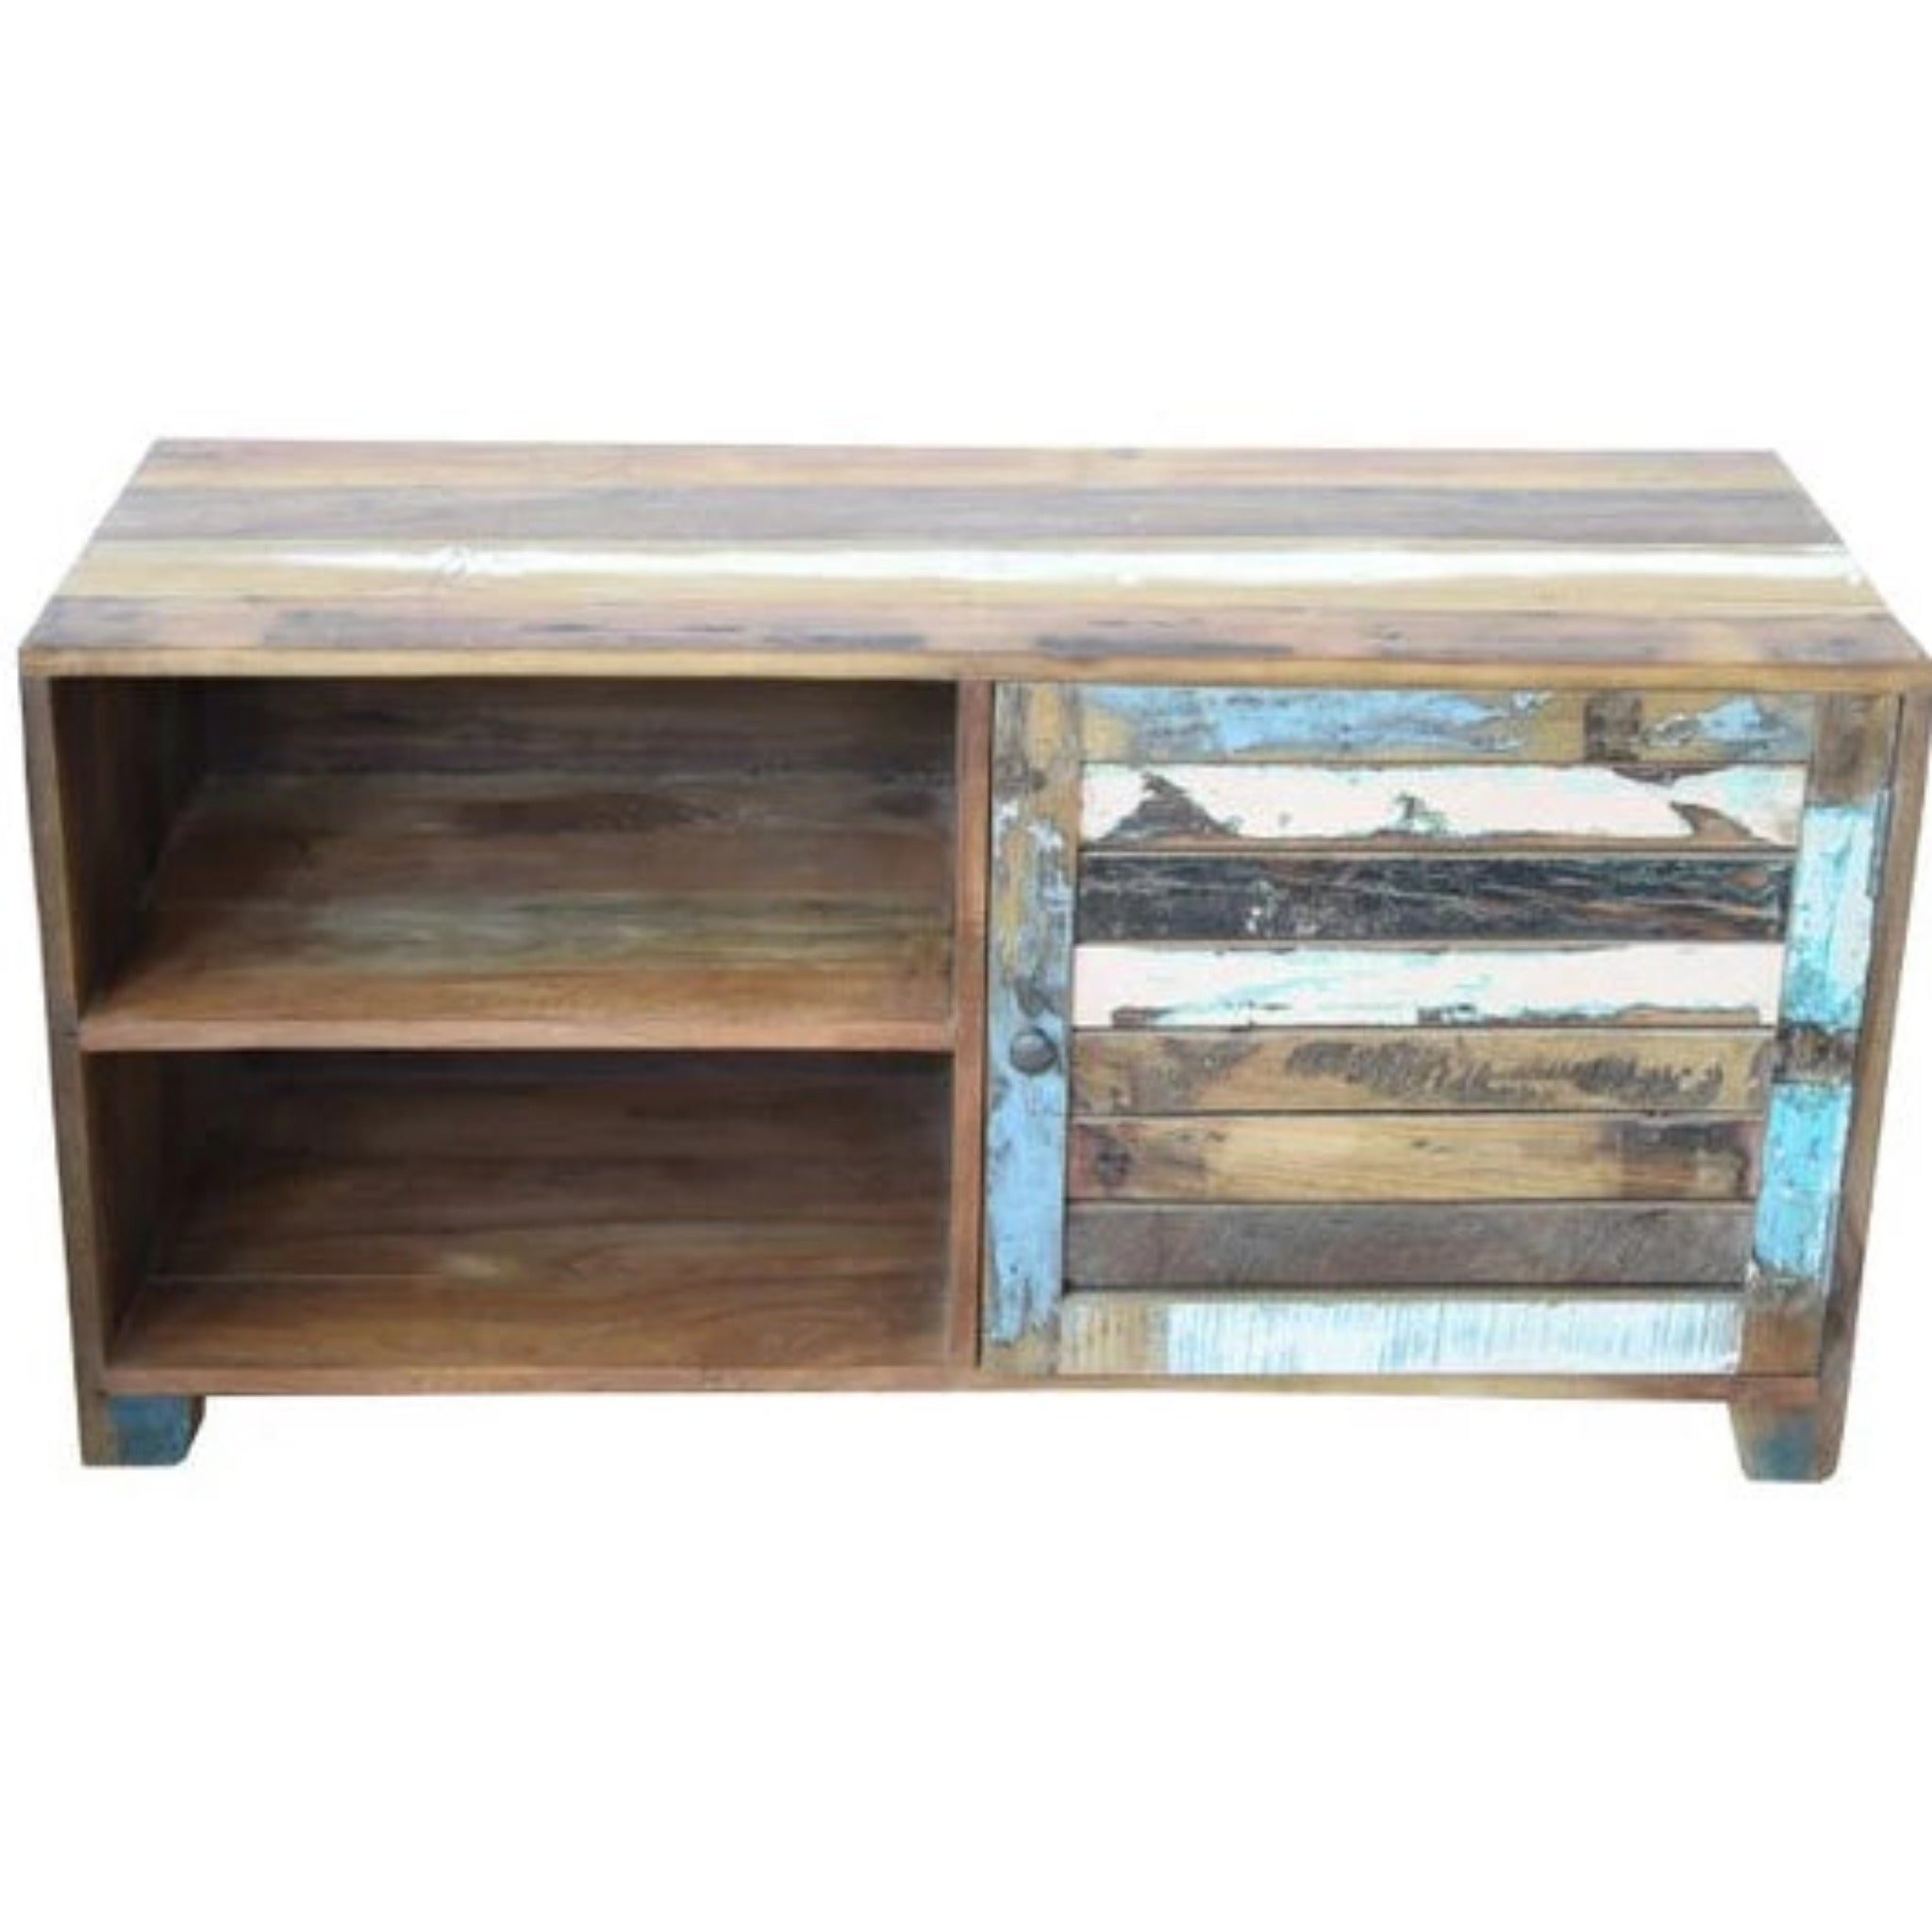 Wild TV Unit handmade from Solid reclaimed front view of unit with closed door on right hand side